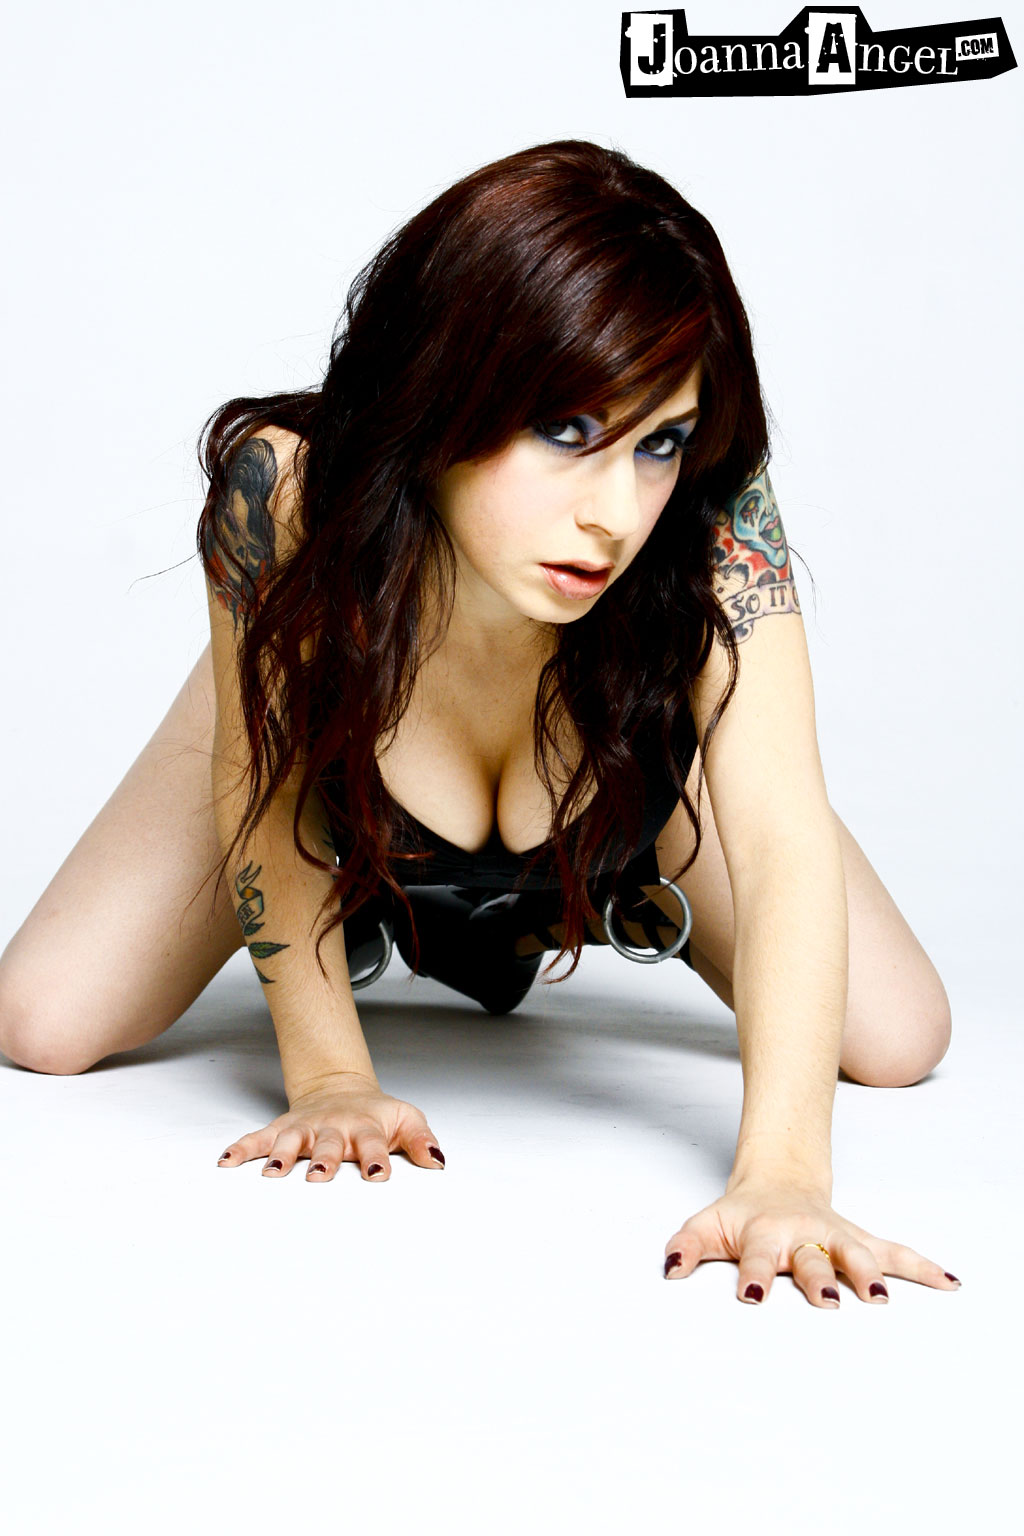 Joanna Angel picture sample number 4